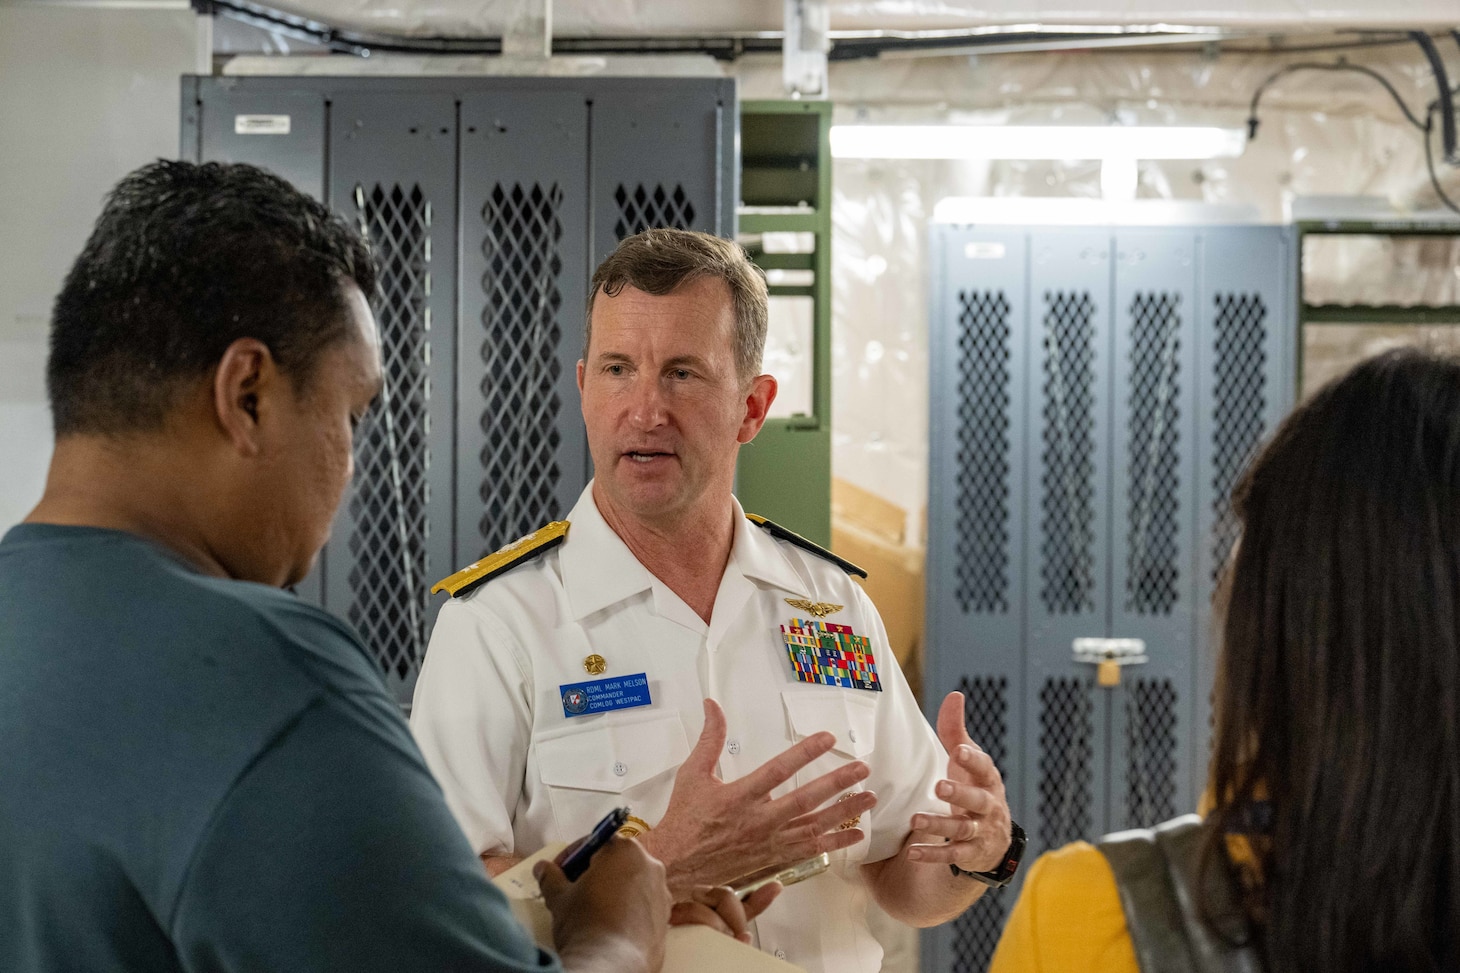 INGAPORE (July 23, 2024) Rear Adm. Mark A. Melson, Commander, Logistics Group Western Pacific/Task Force 73 (COMLOG WESTPAC/CTF 73) and U.S. Pacific Fleet Executive Agent for Pacific Partnership, center, explains the mission to local reporters aboard the Spearhead-class expeditionary fast transport ship USNS City of Bismarck (T-EPF 9), during a scheduled port visit to Singapore Naval Installation (SNI) as part of Pacific Partnership. Now in its 20th iteration, Pacific Partnership series is the largest annual multinational humanitarian assistance and disaster relief preparedness mission conducted in the Indo-Pacific. (U.S. Navy photo by Mass Communication Specialist 1st Class Jomark A. Almazan)